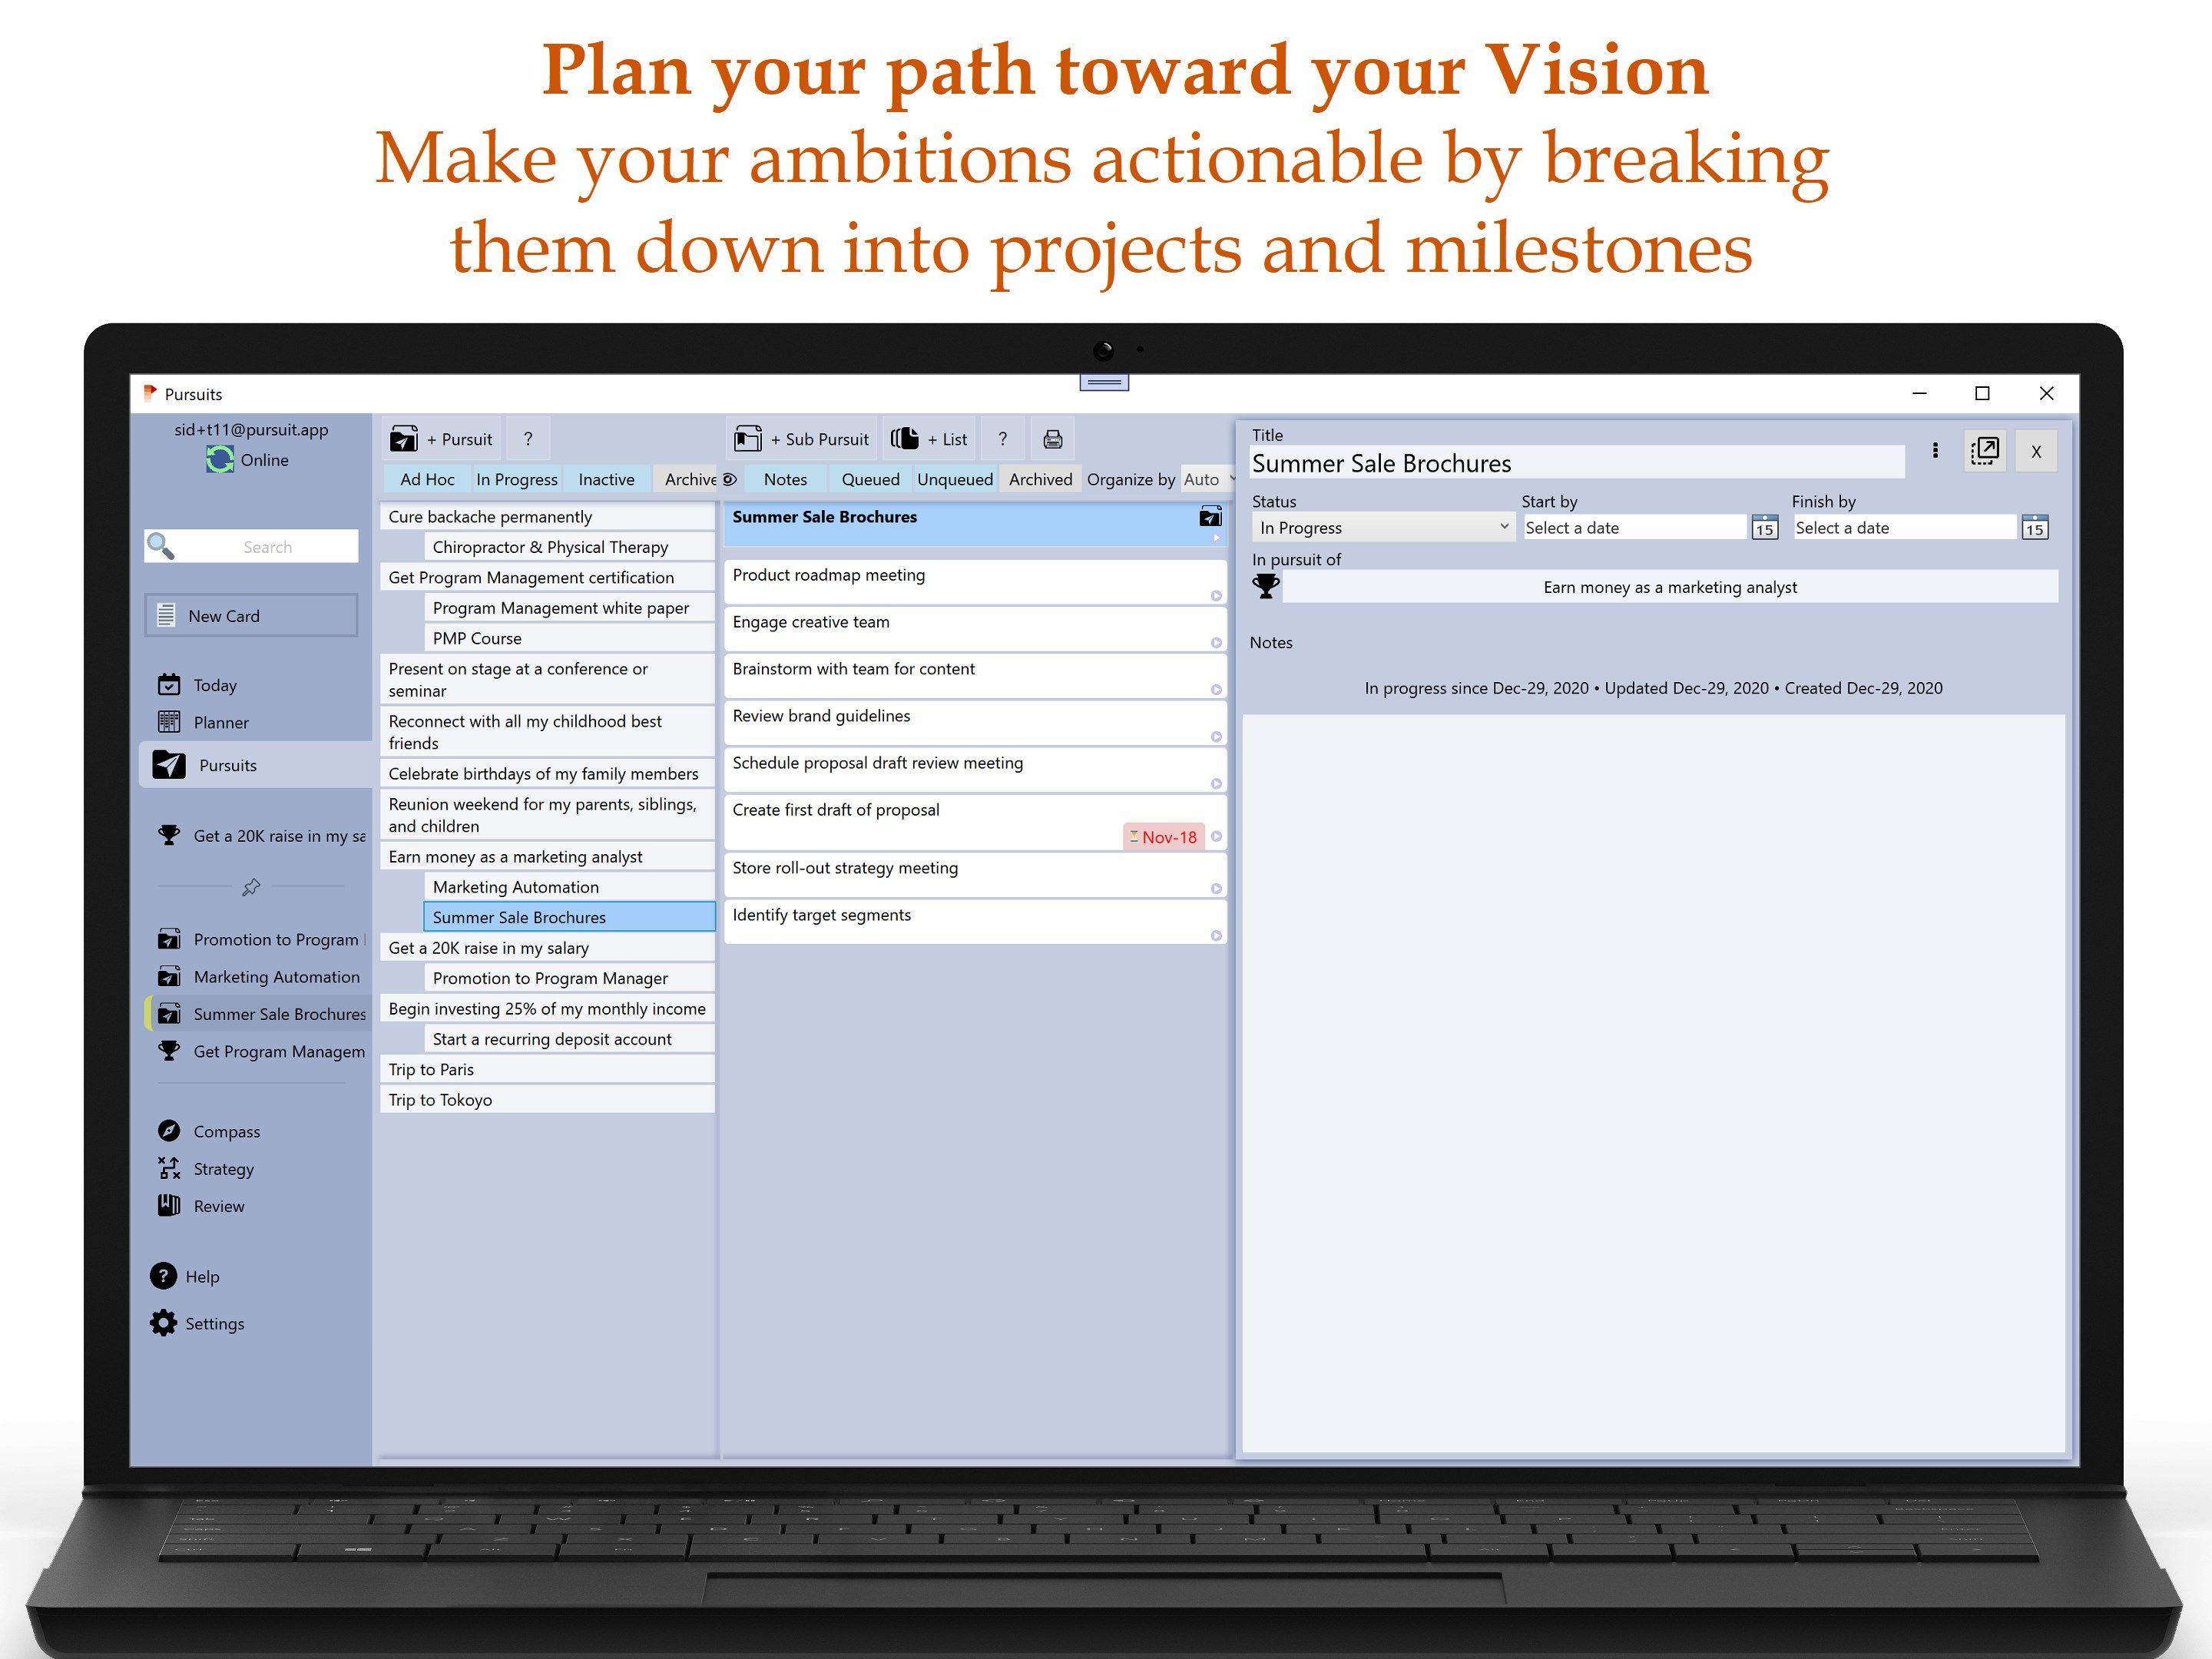 Plan your path toward your Vision: Make your ambitions actionable by breaking them down into projects and milestones